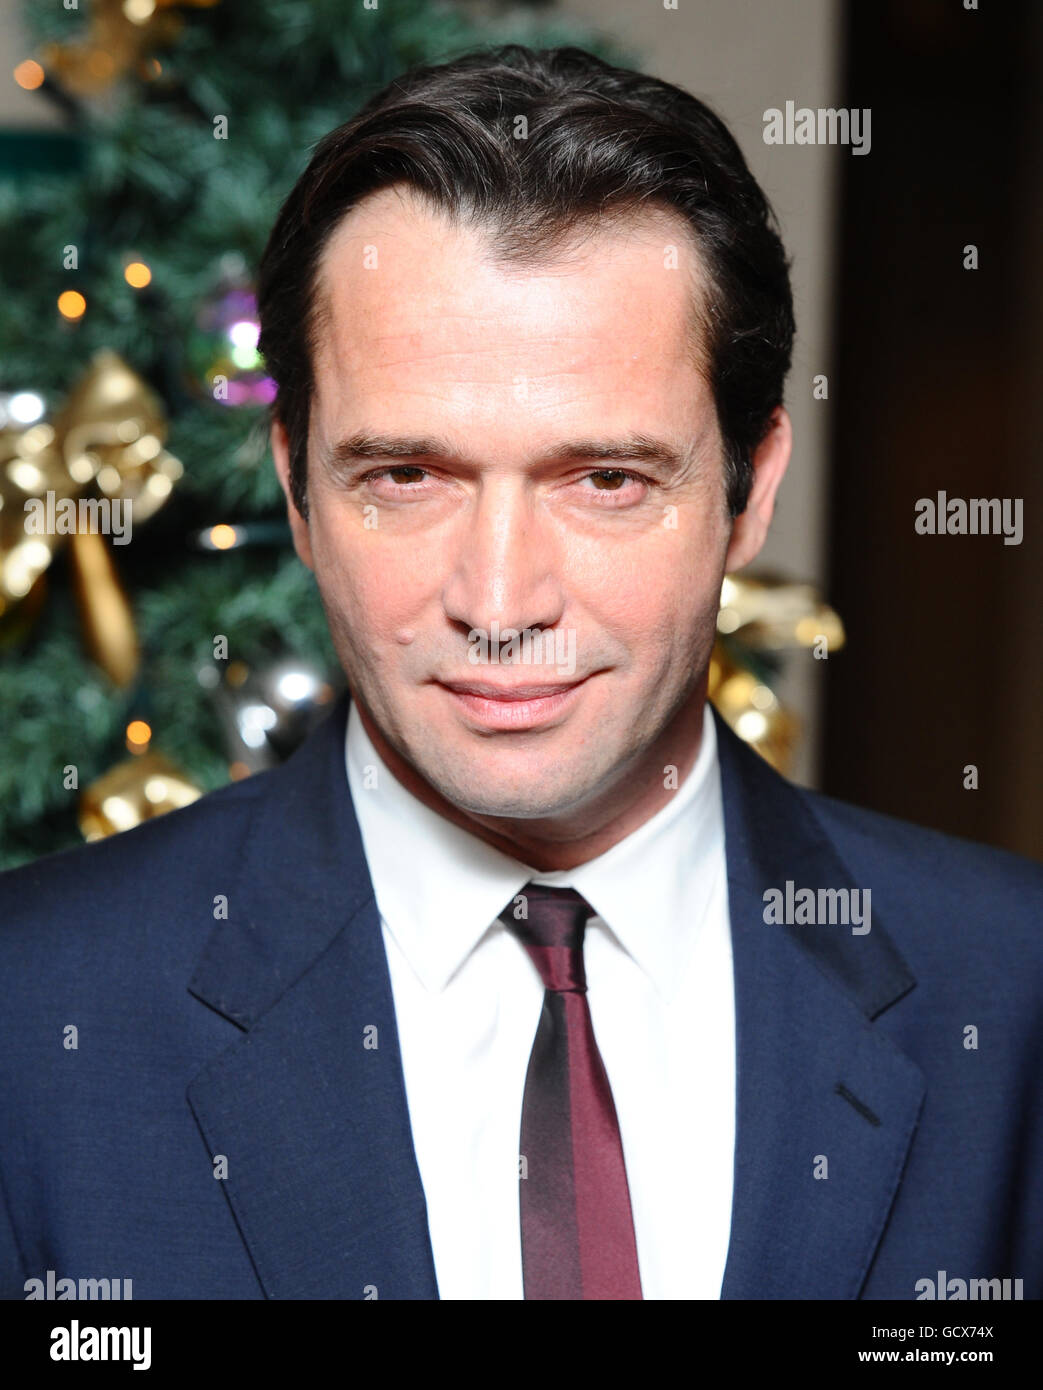 James Purefoy arrives at the Sky 3D-Women in Film and TV Awards held at the Hilton Hotel in London. PRESS ASSOCIATION photo. Picture date: Friday 3rd December 2010. Photo credit should read: Ian West/PA Stock Photo